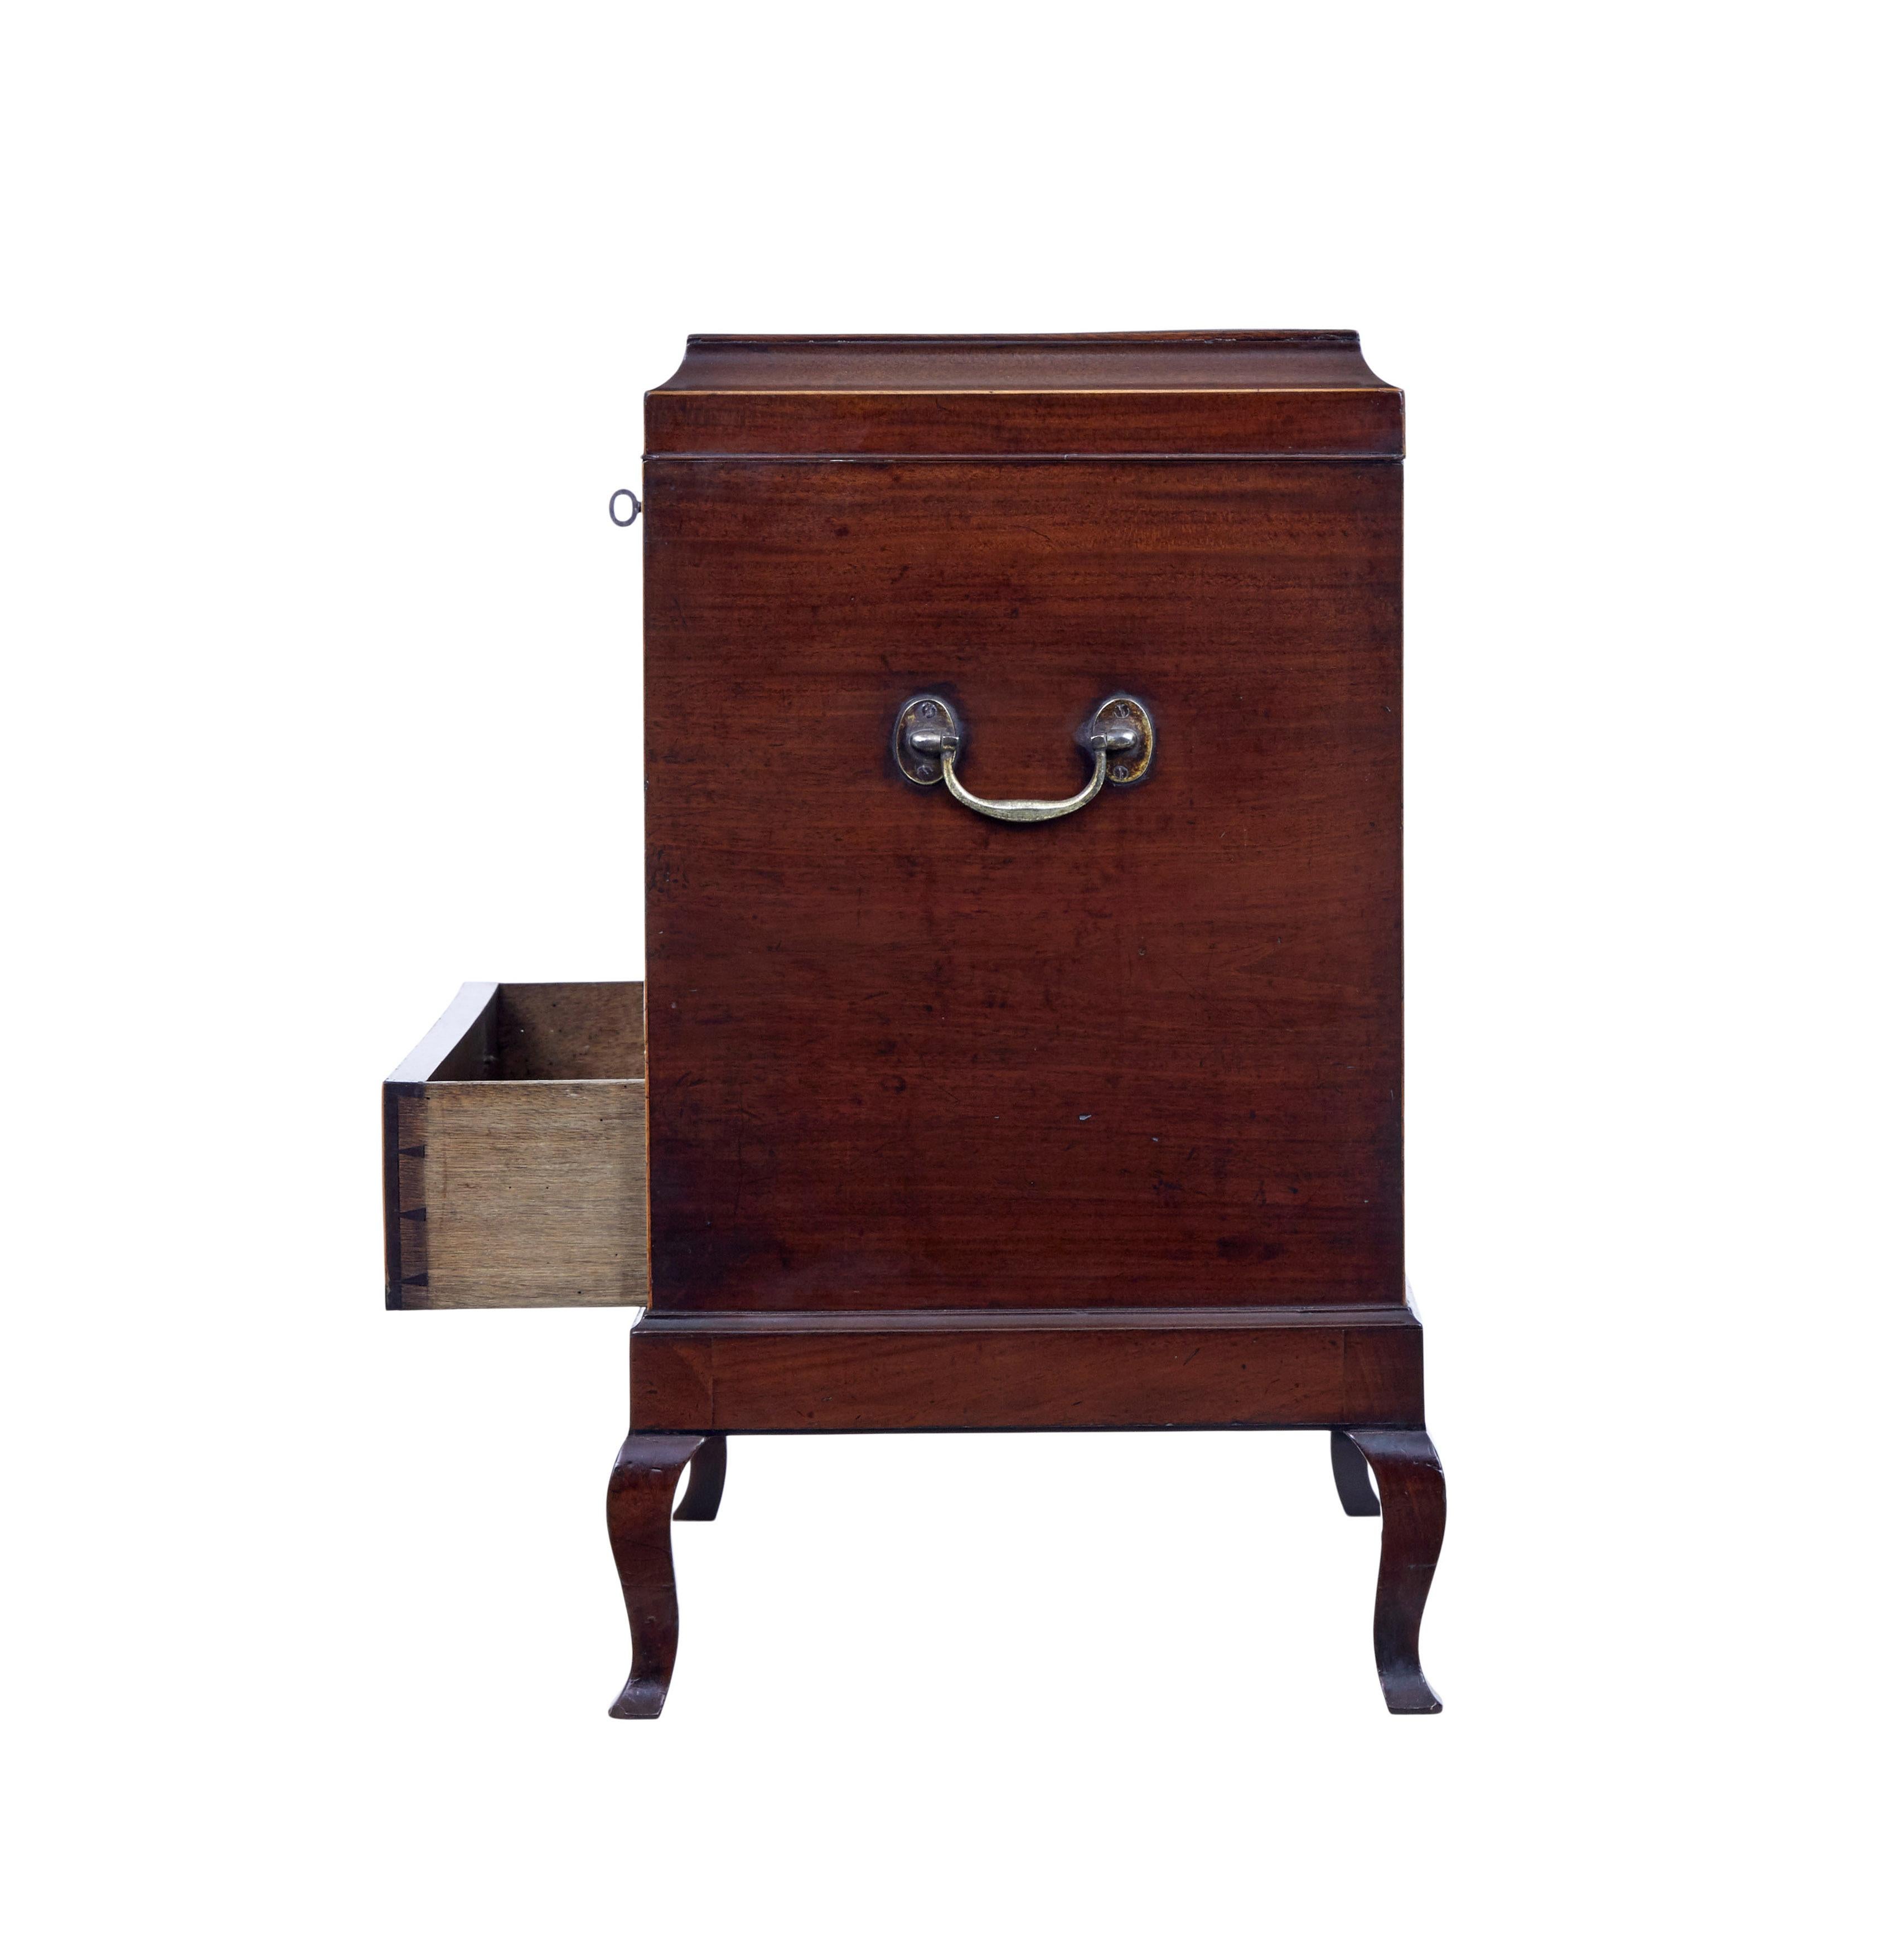 English Early 20th century Edwardian mahogany inlaid wine cooler For Sale